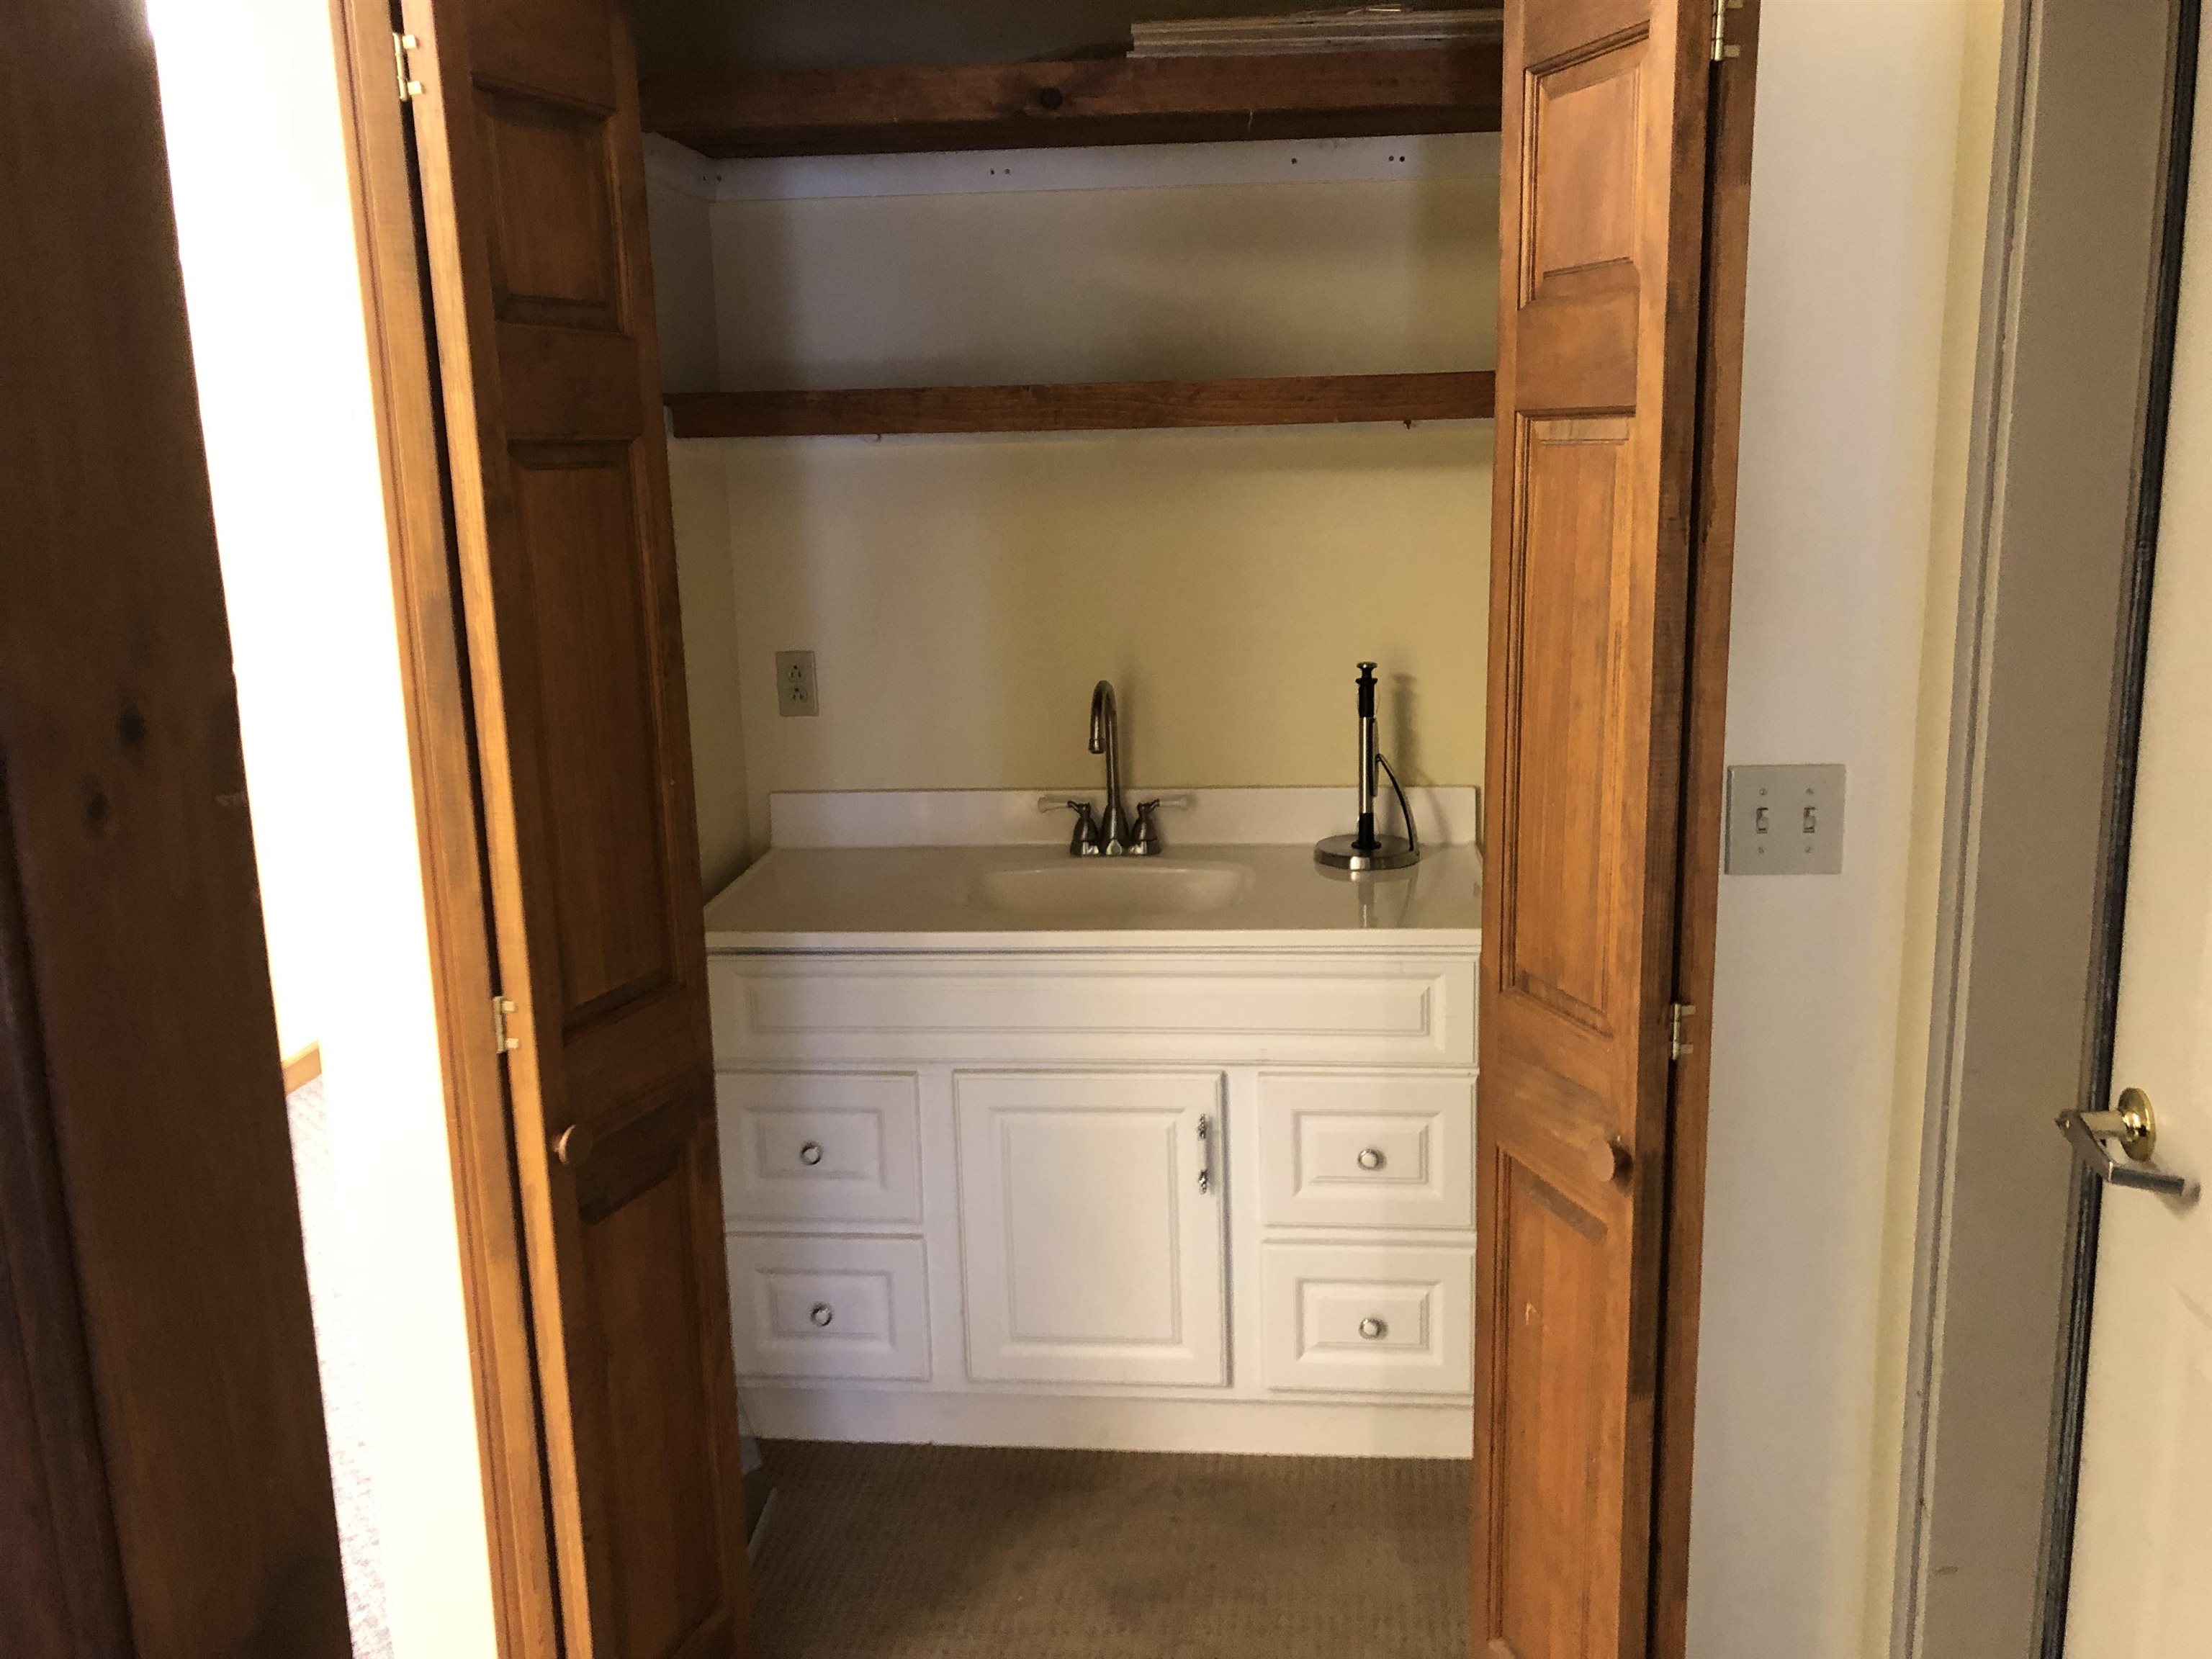 separate sink area